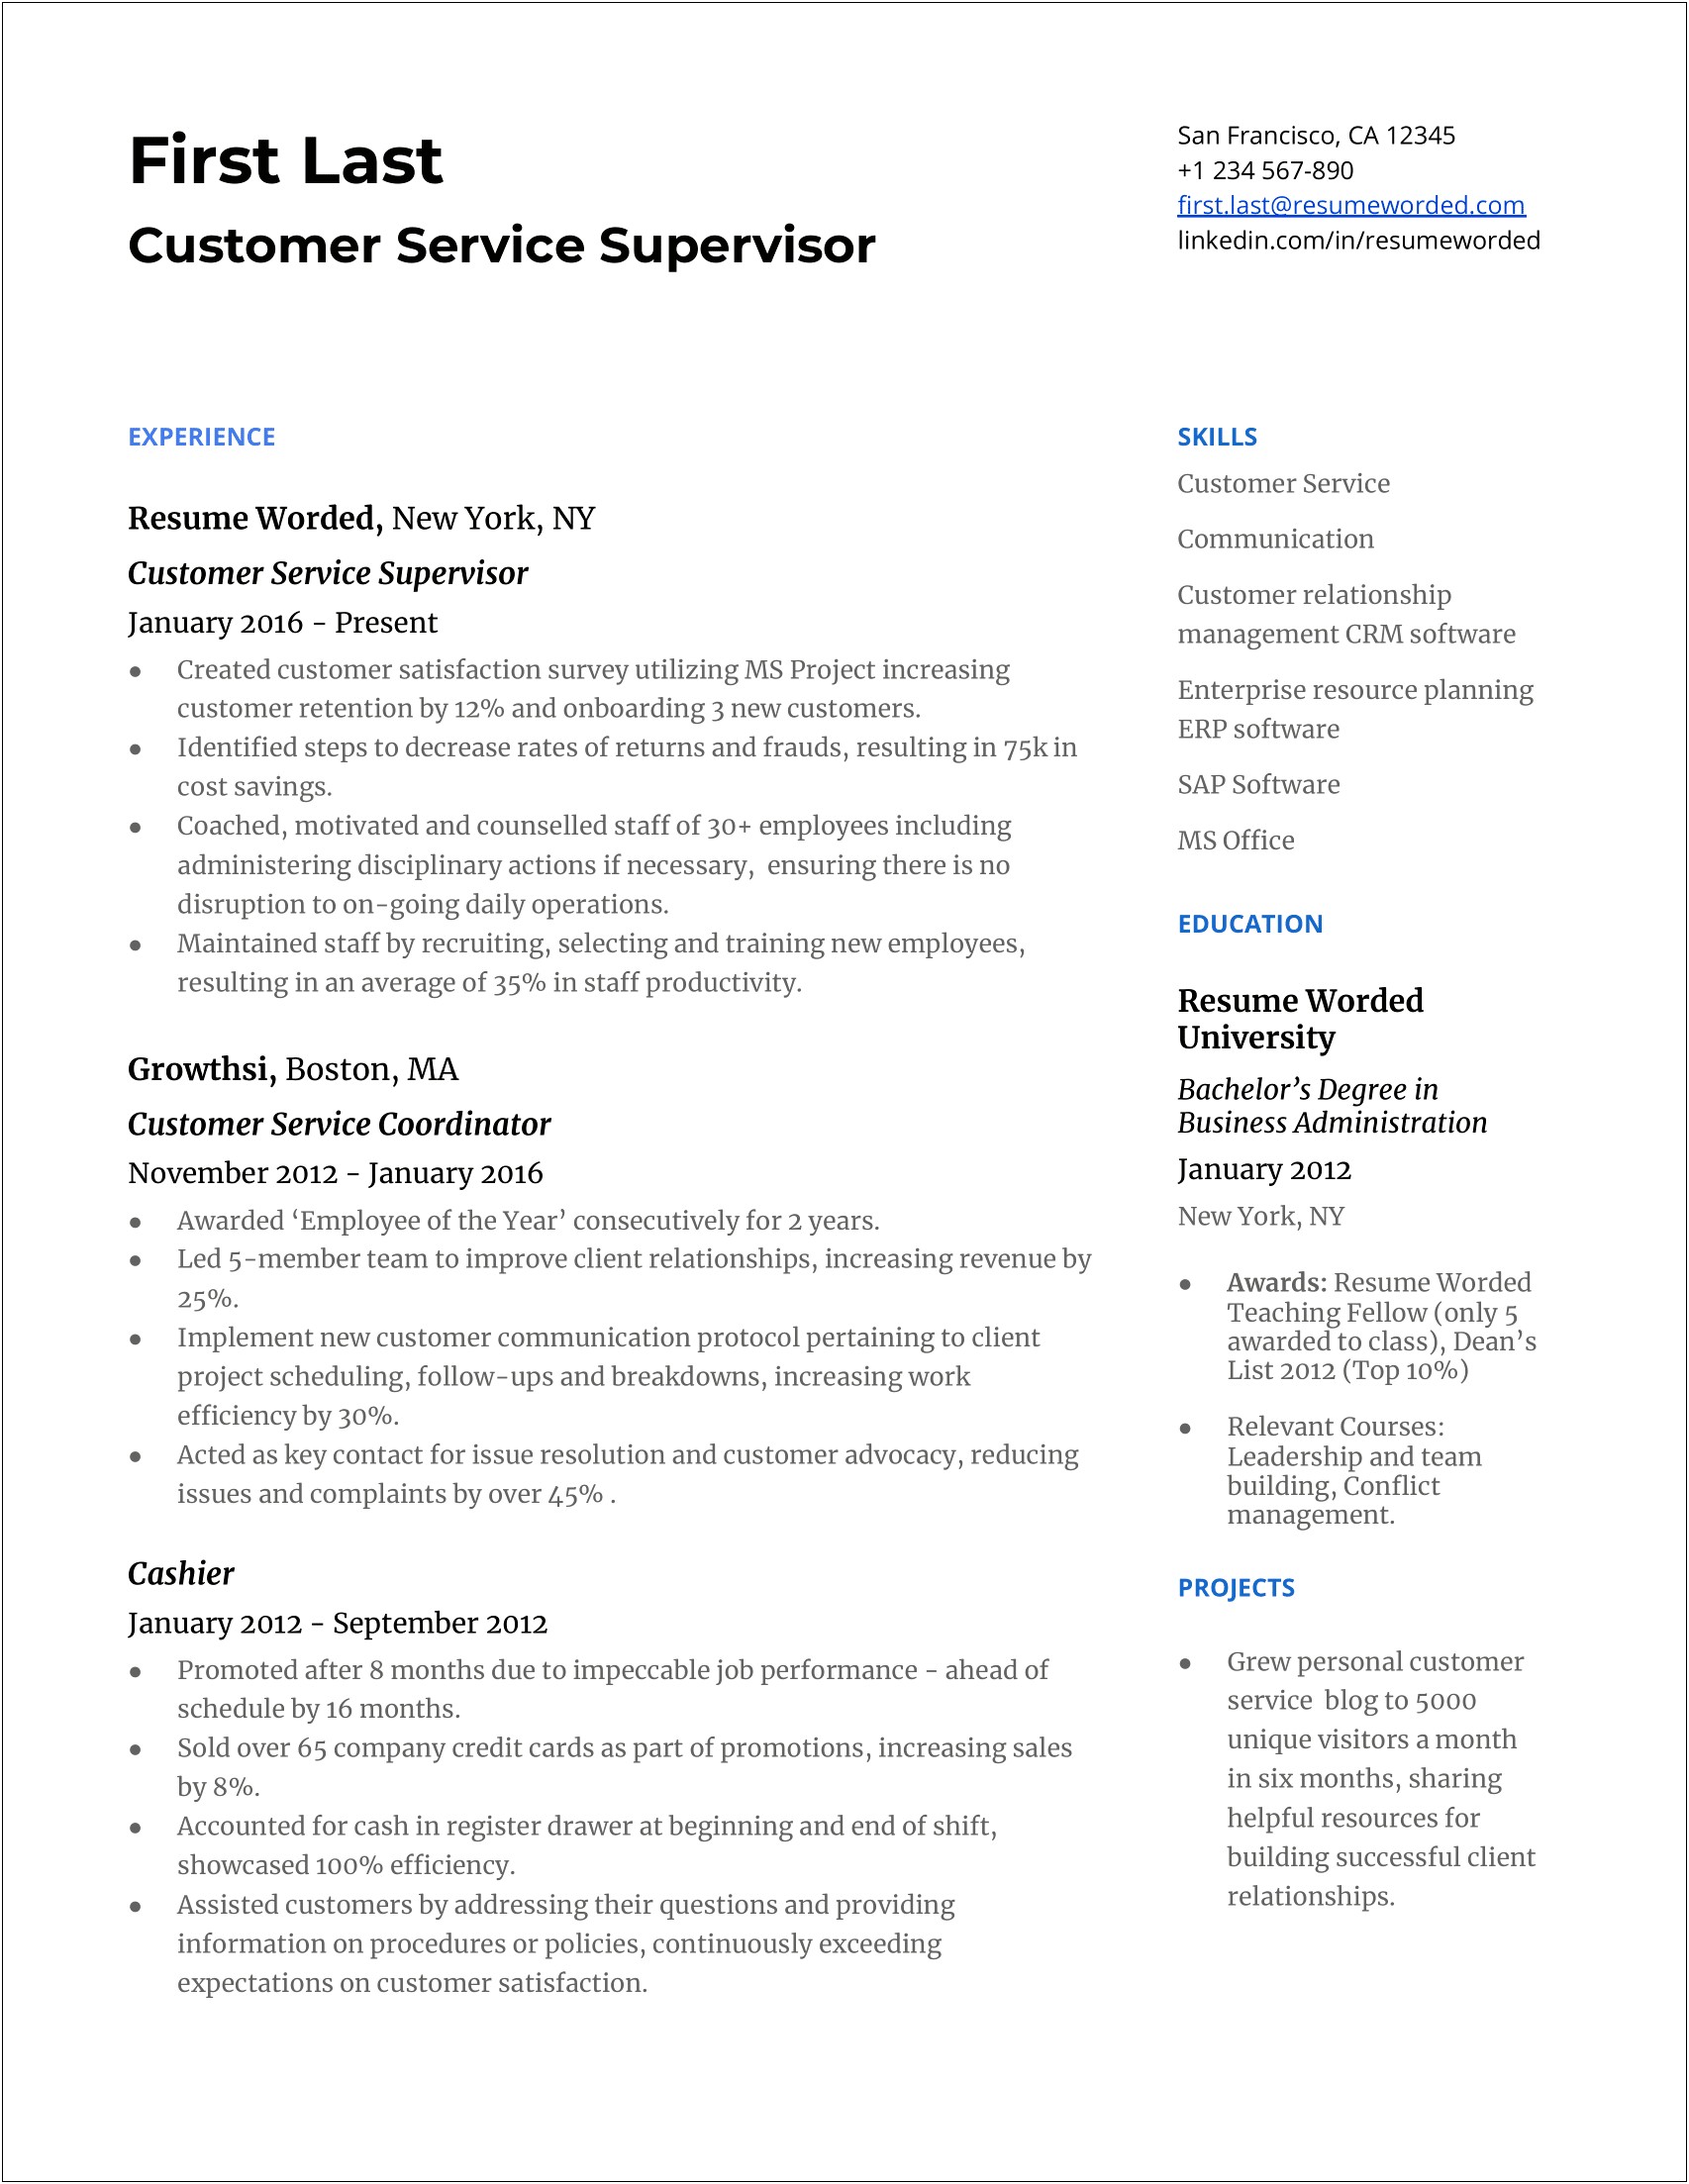 Customer Service Resume Example With Achievements